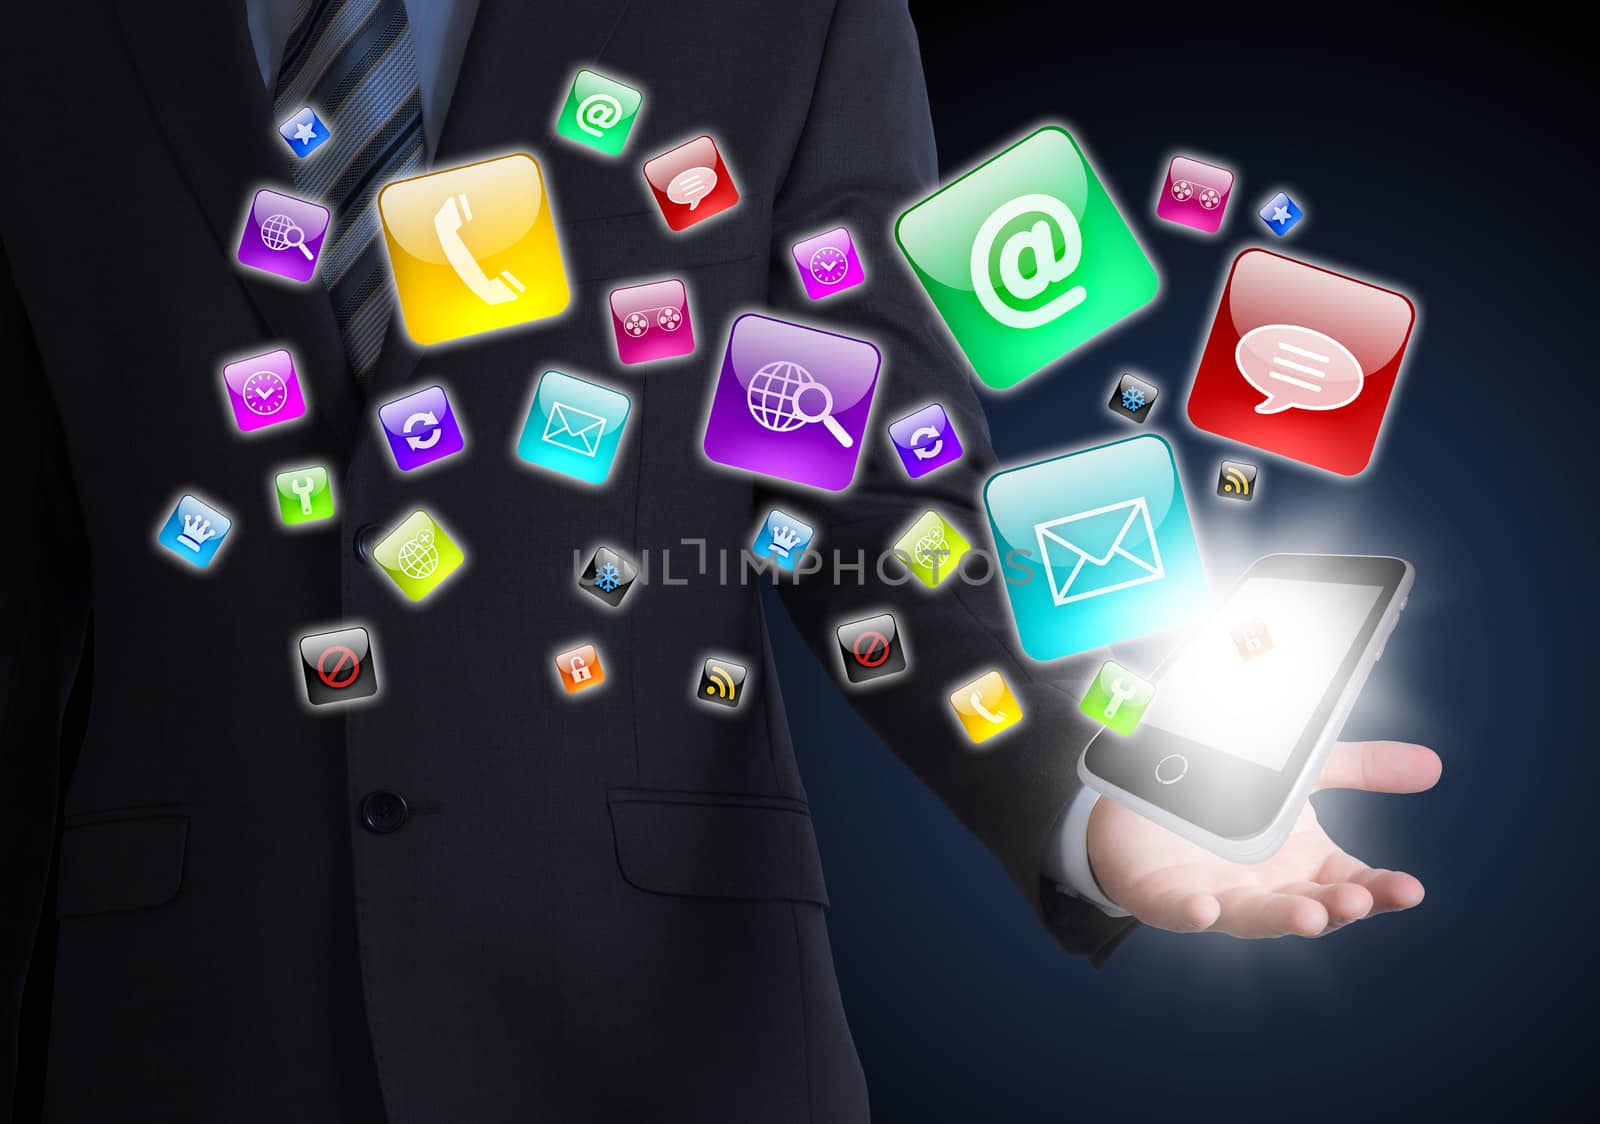 Man in suit holding a smartphone in hand. Application icons around smartphone. The concept of software